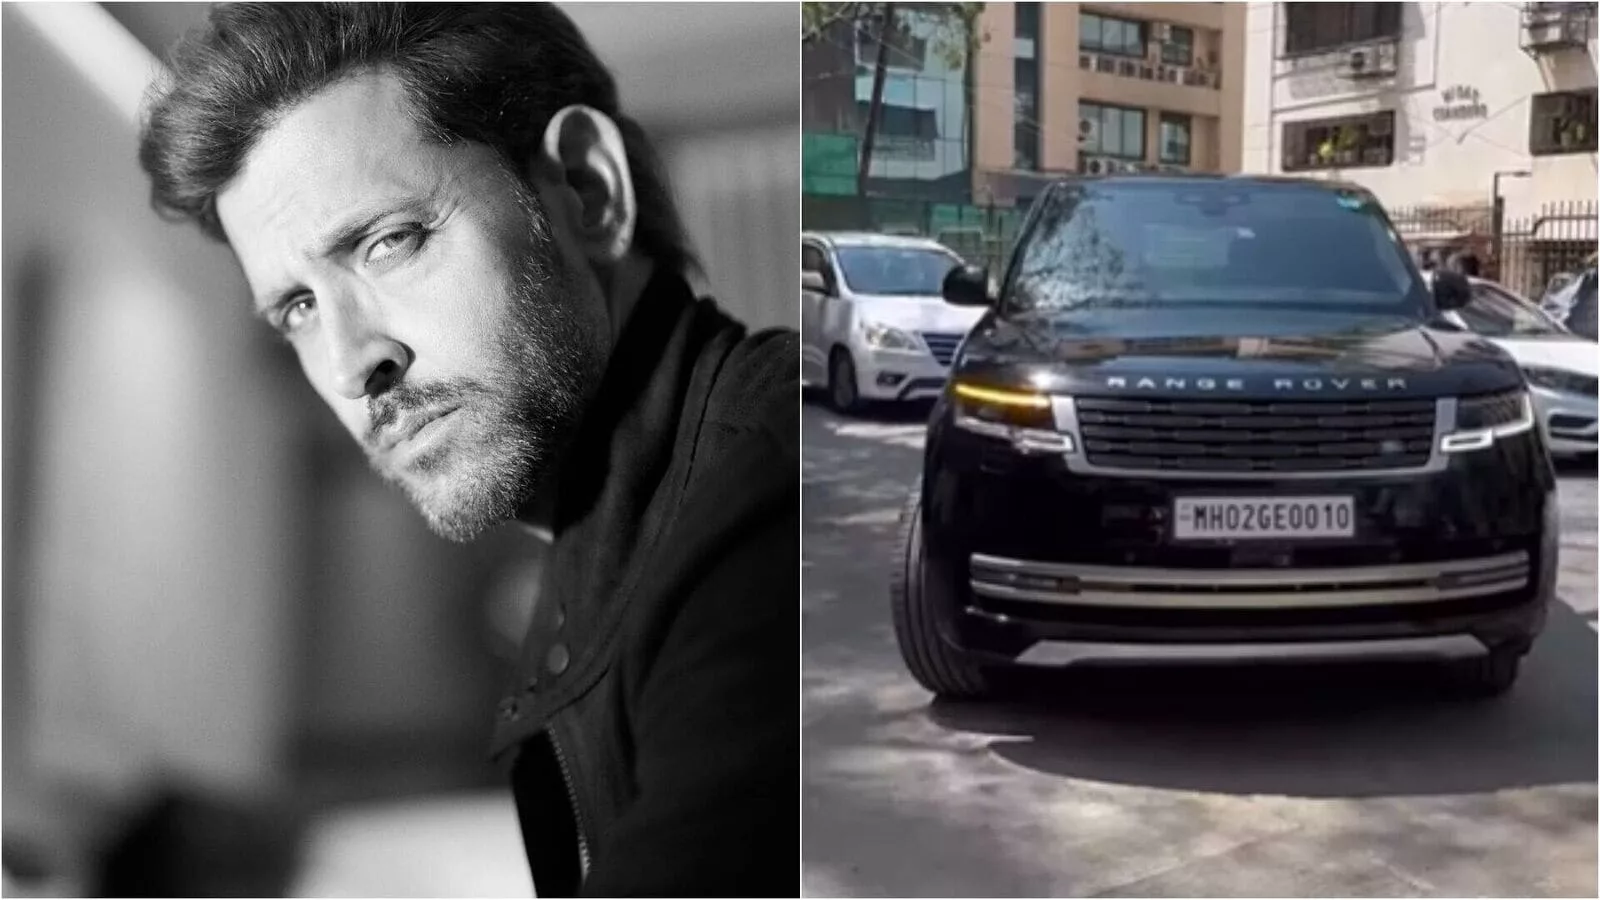 Actor Hrithik Roshan Brings Home The New Range Rover Priced At Rs. 3.16 Crore